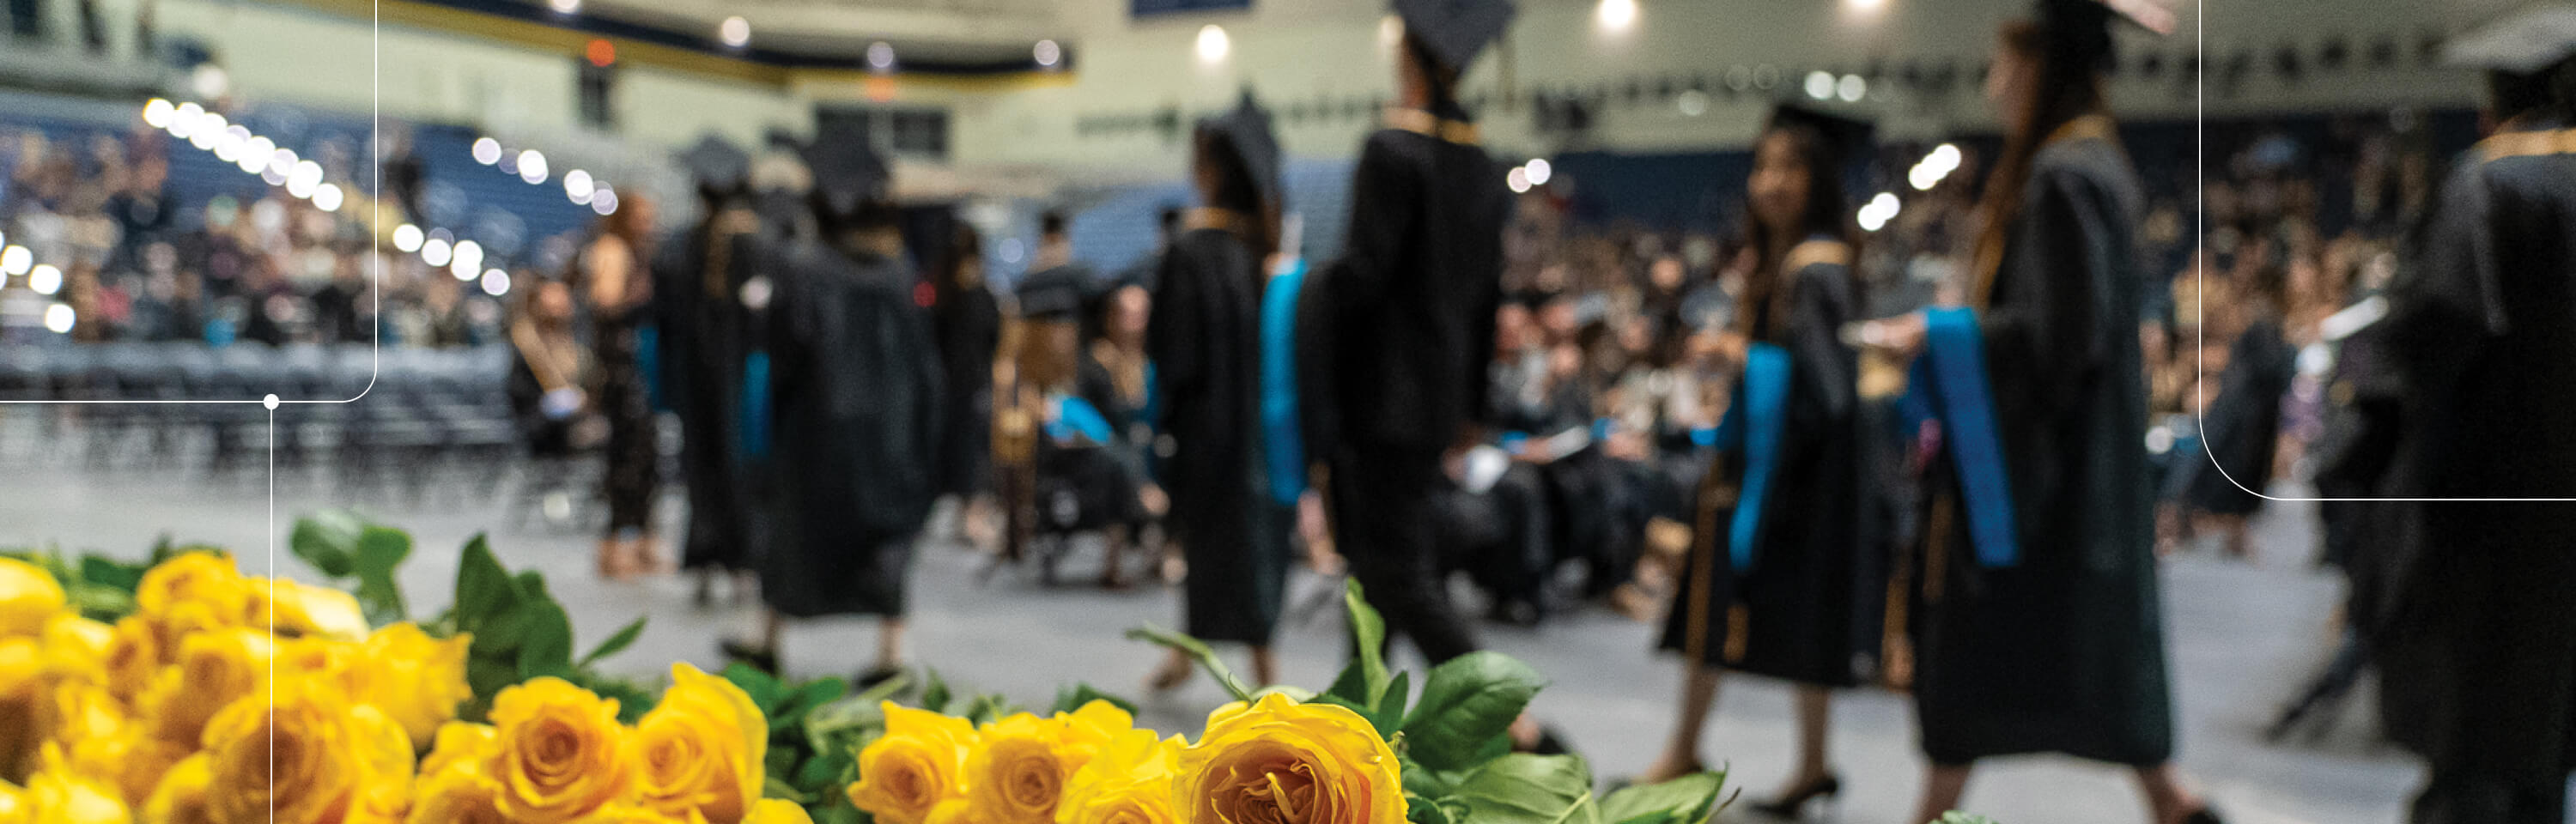 Yellow roses in the foreground with students in cap and gown in the background, for a commencement ceremony